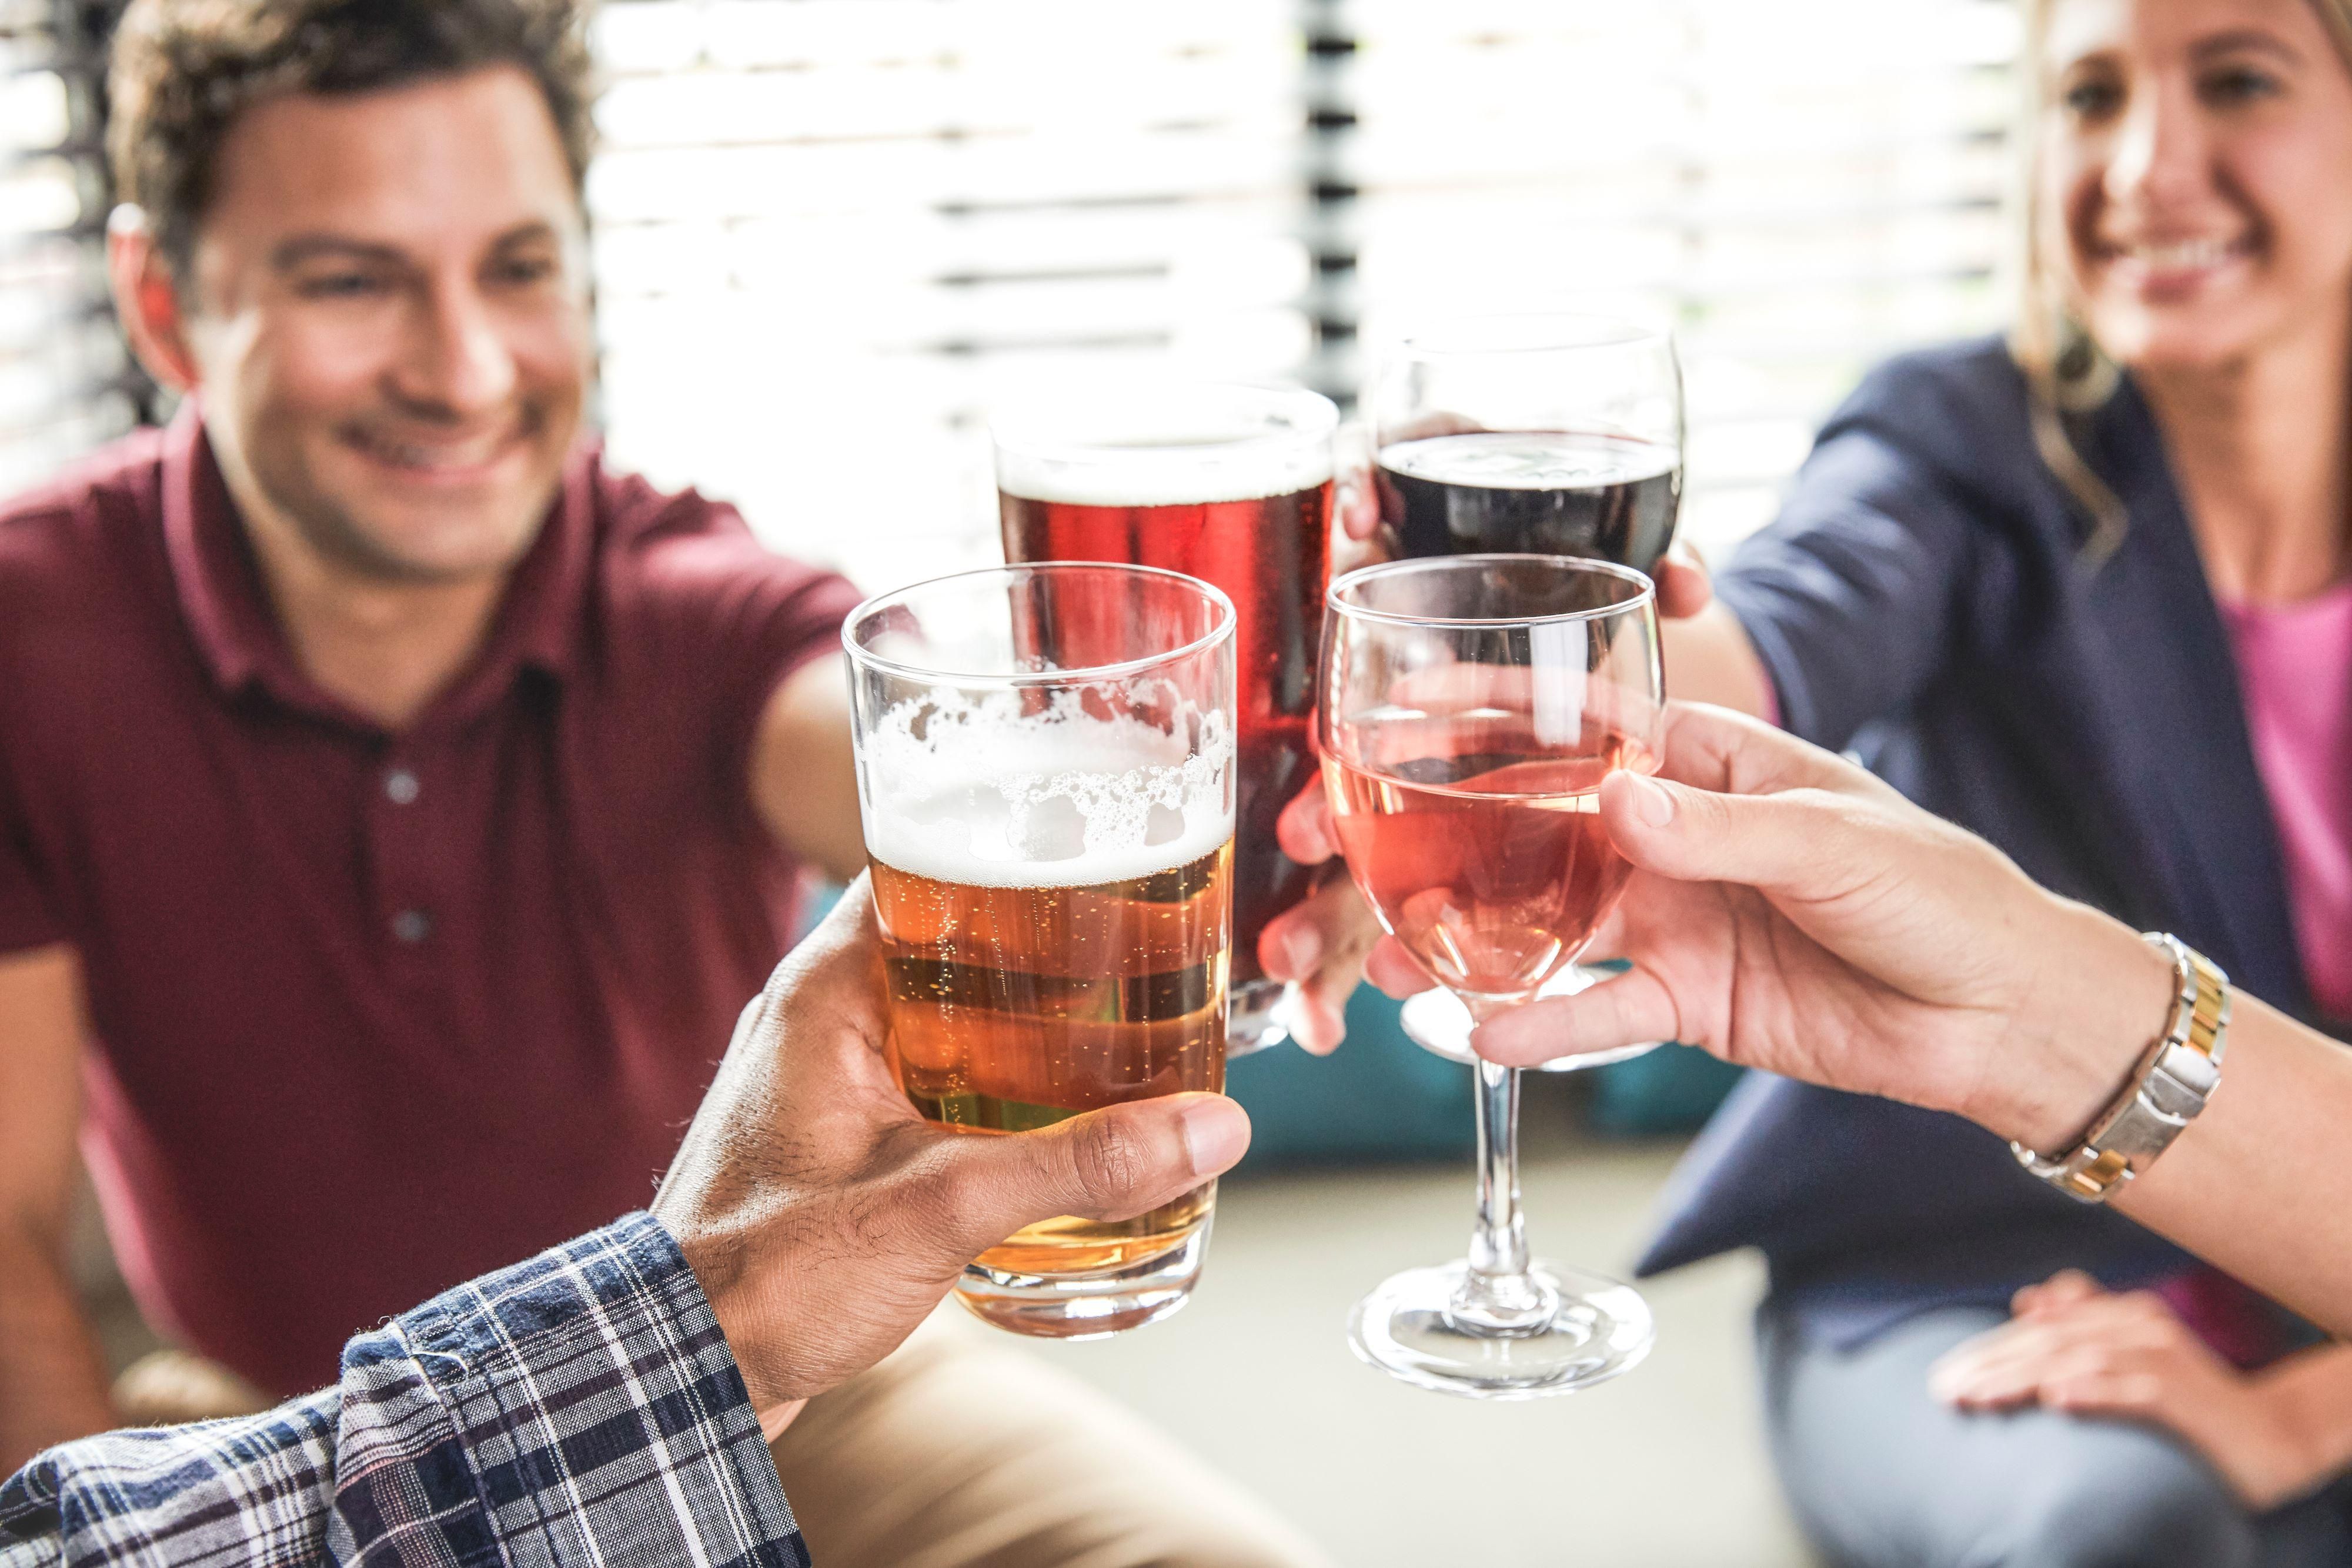 Join us every Monday, Tuesday, and Wednesday 5:30pm-7:30pm in our lobby for our Manager's Social! Enjoy free refreshments, including an beer, wine, or a soft drink and a rotating menu of appetizers. Unwind and socialize with other guests at this event after a hard days work! 